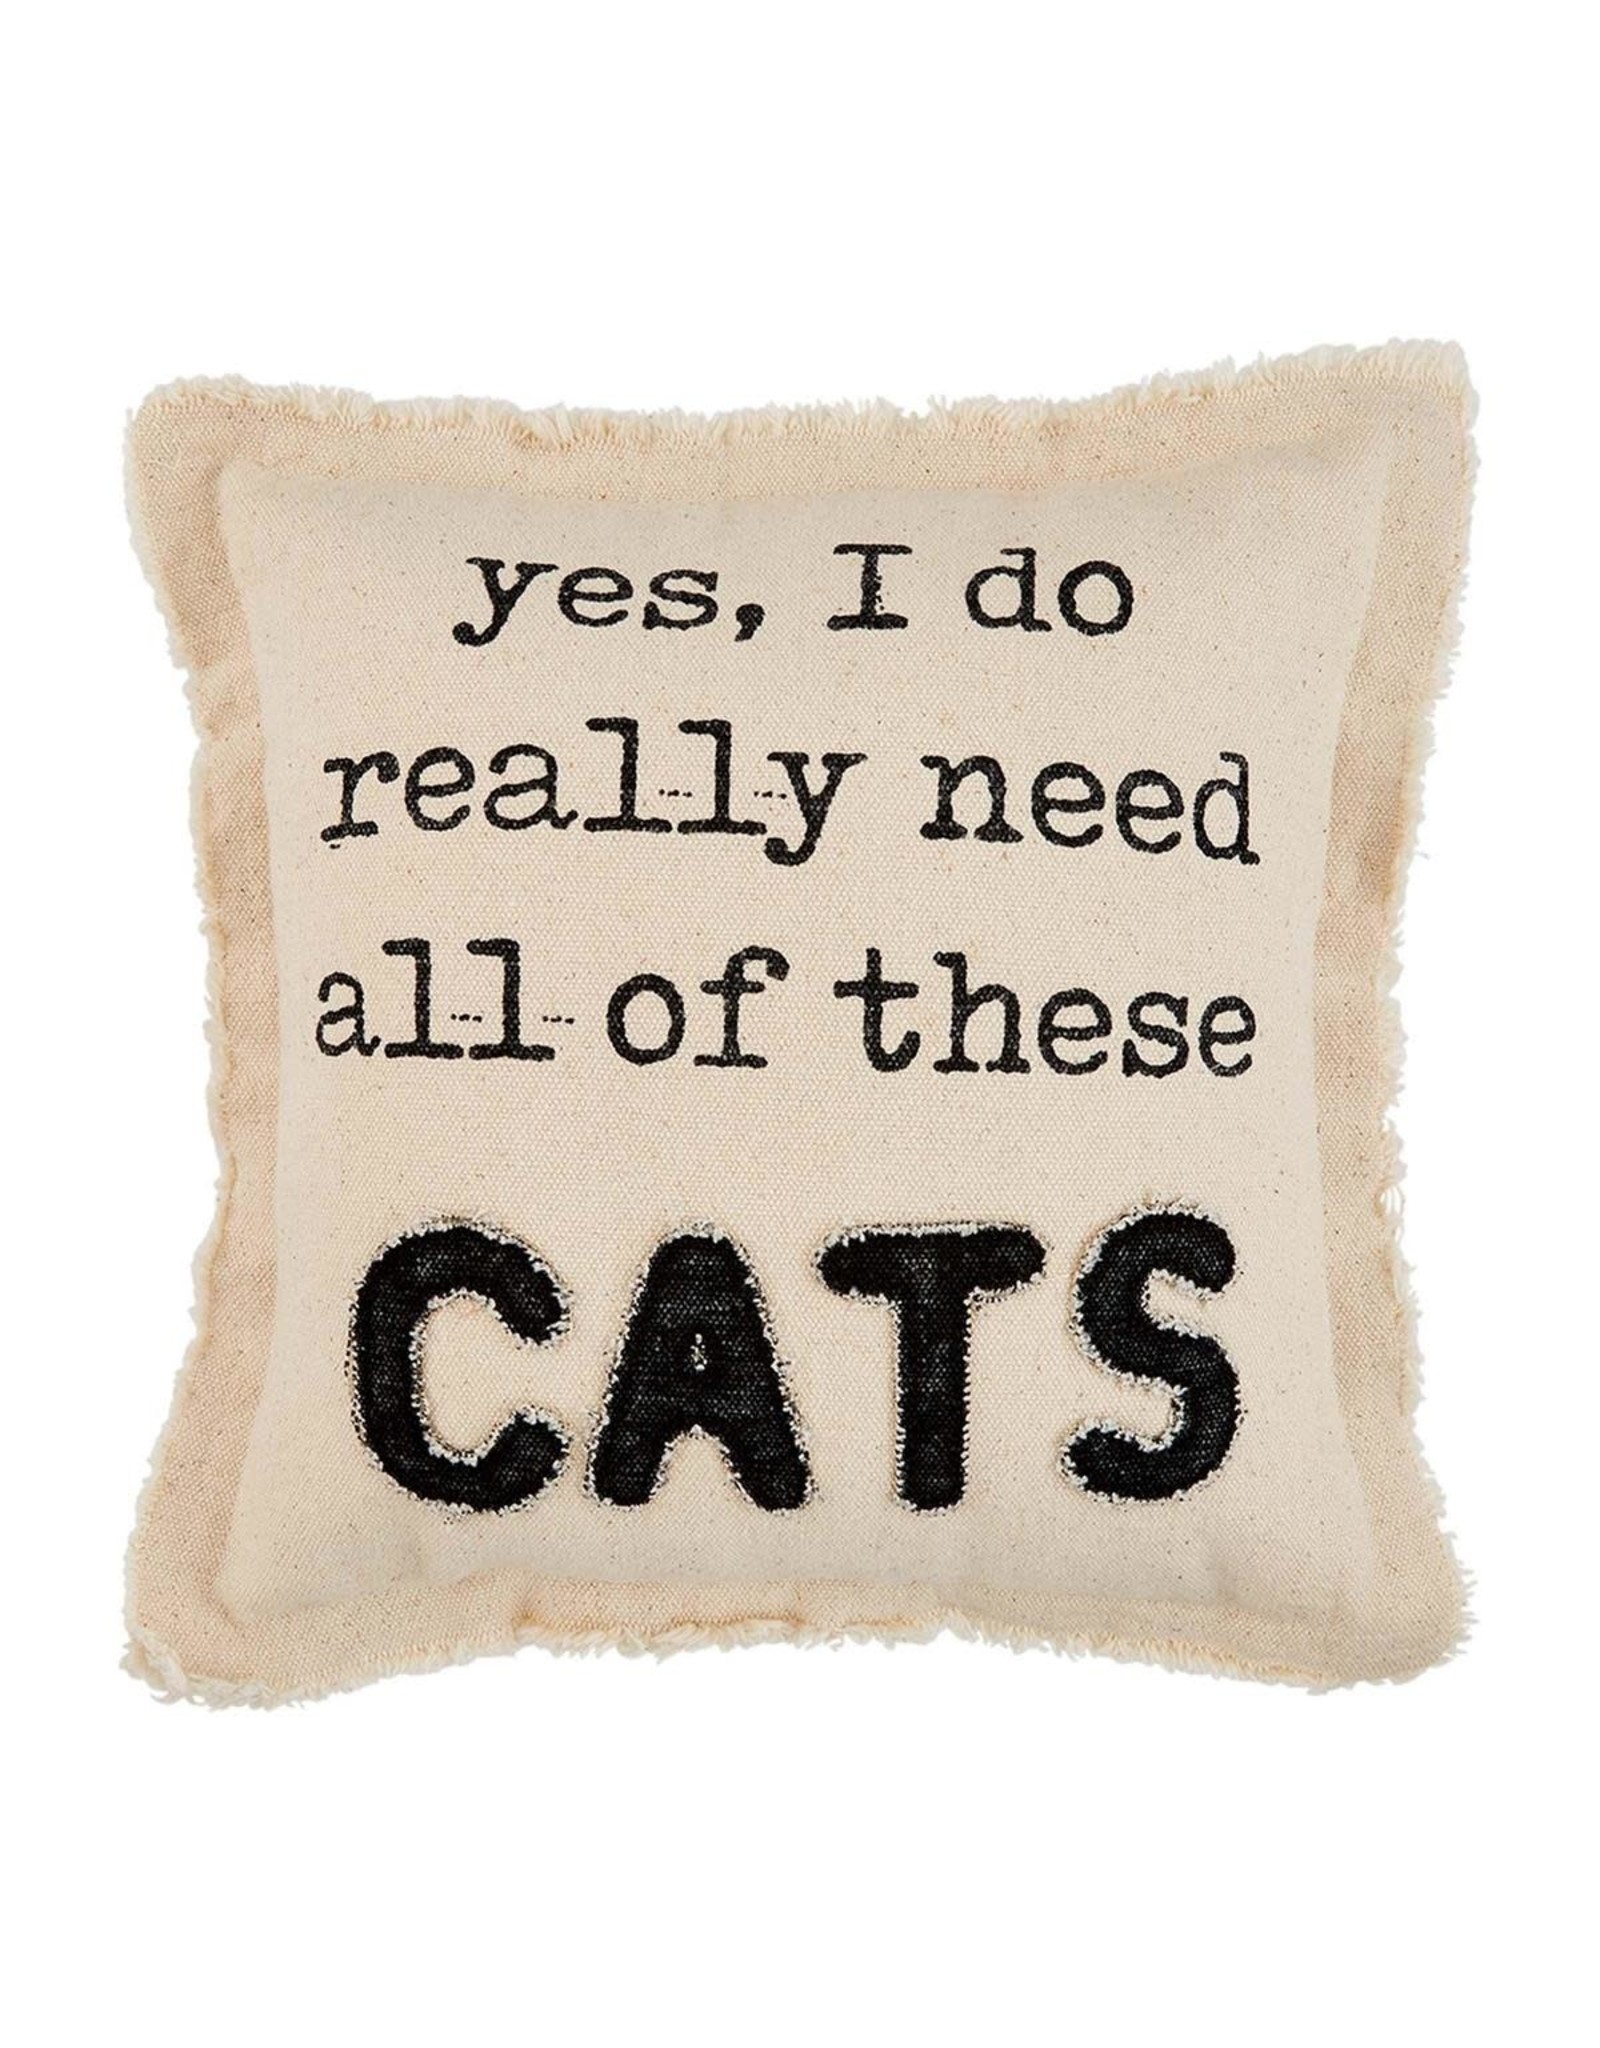 Mud Pie Washed Canvas Pillow Yes I Do Really Need All Of These Cats